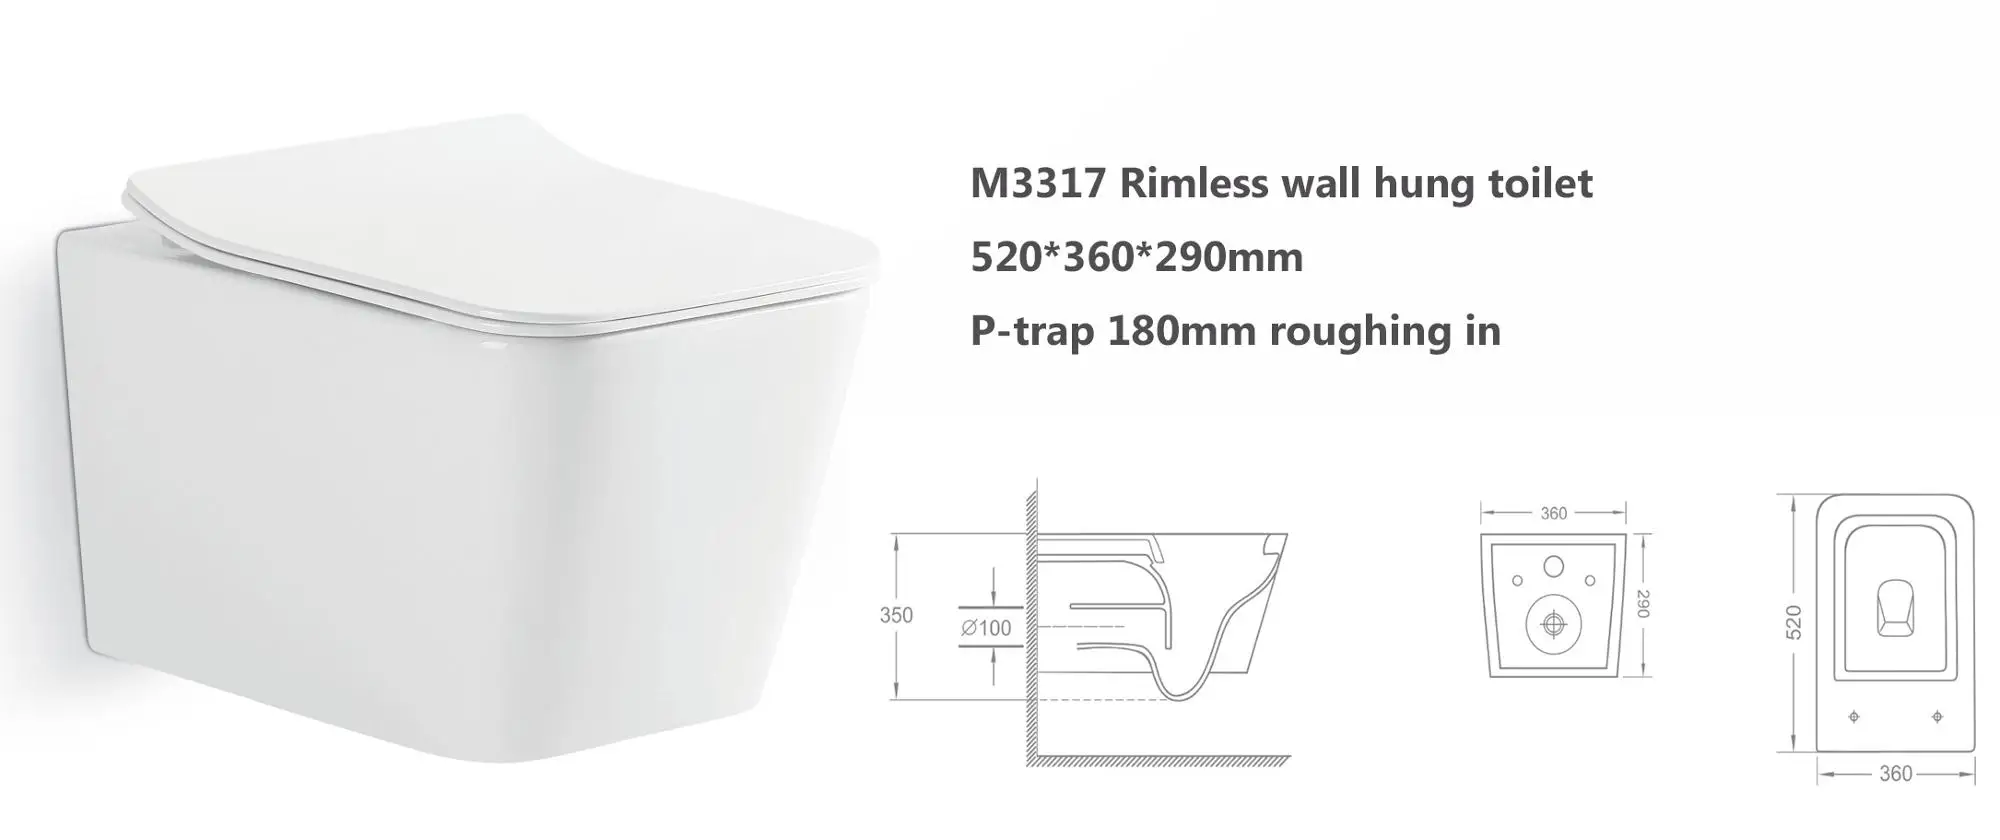 European CE certificated rectangle pan rimless wall hung toilet